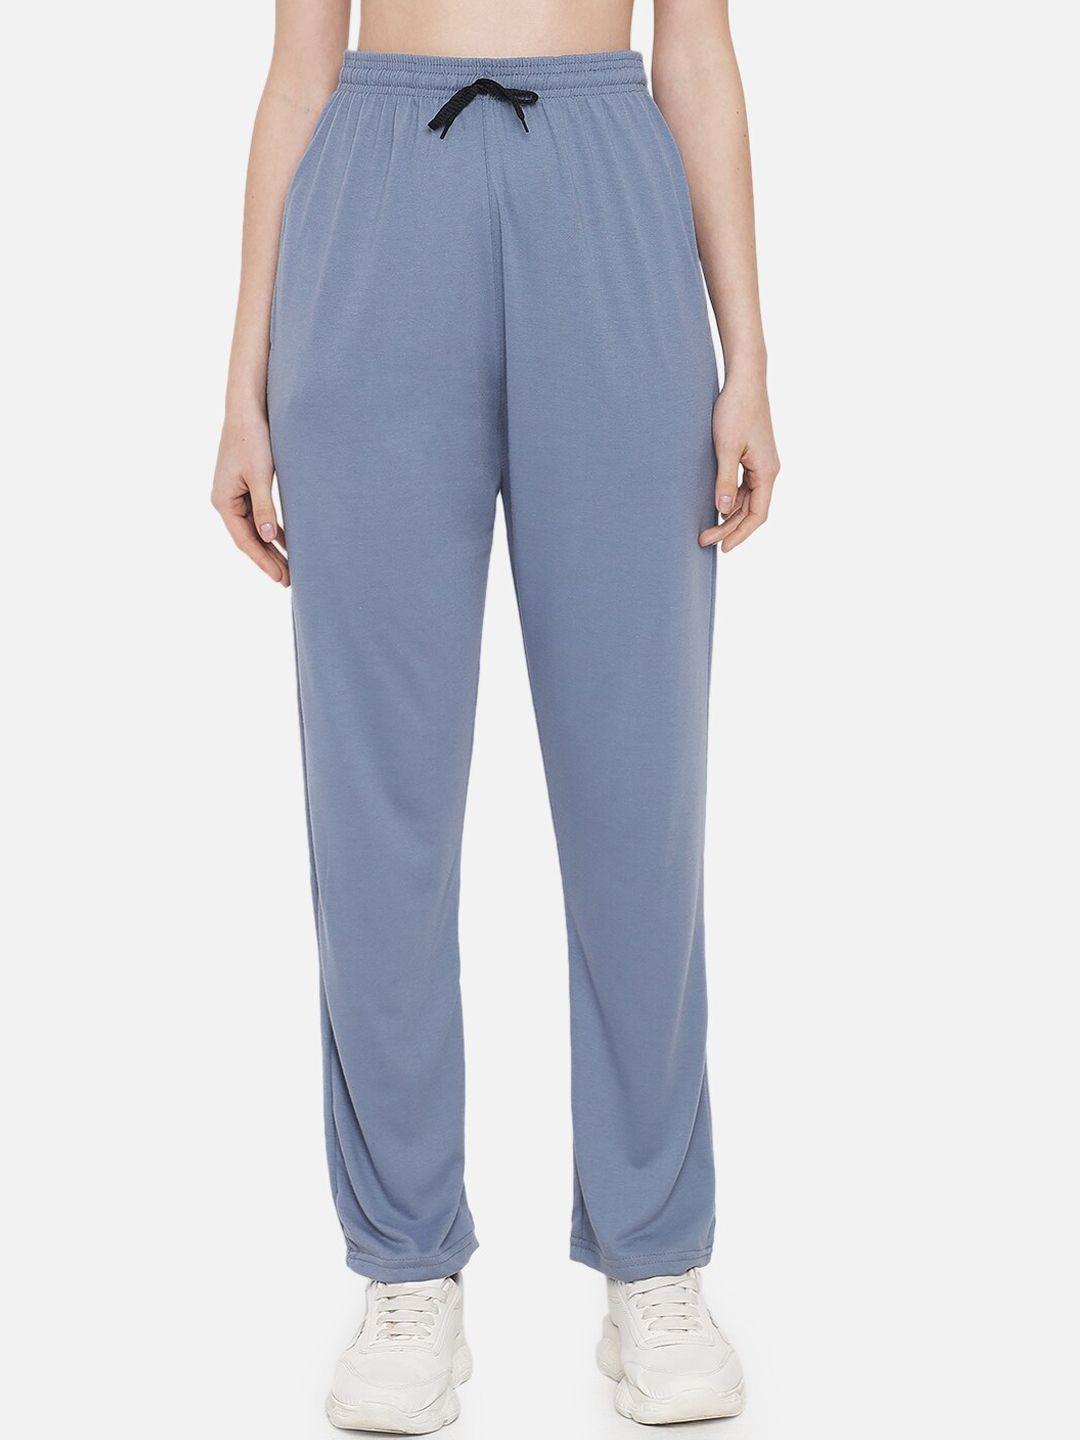 fflirtygo-women-blue-solid-relaxed-fit-cotton-track-pants